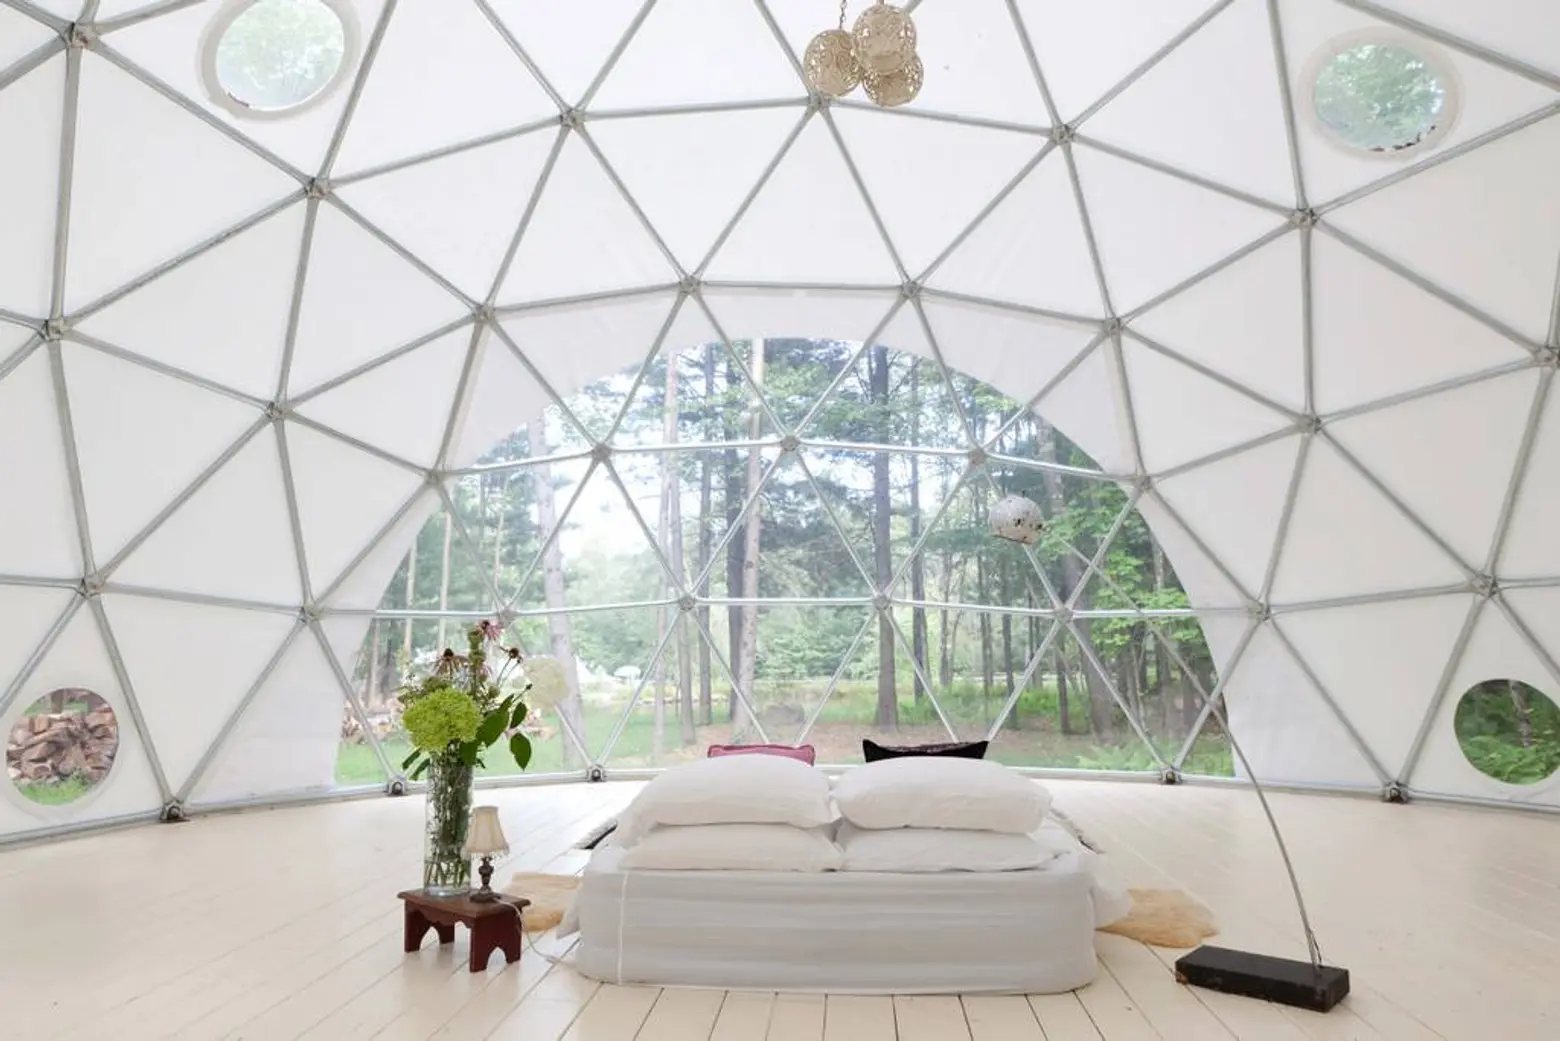 Geodome glamping